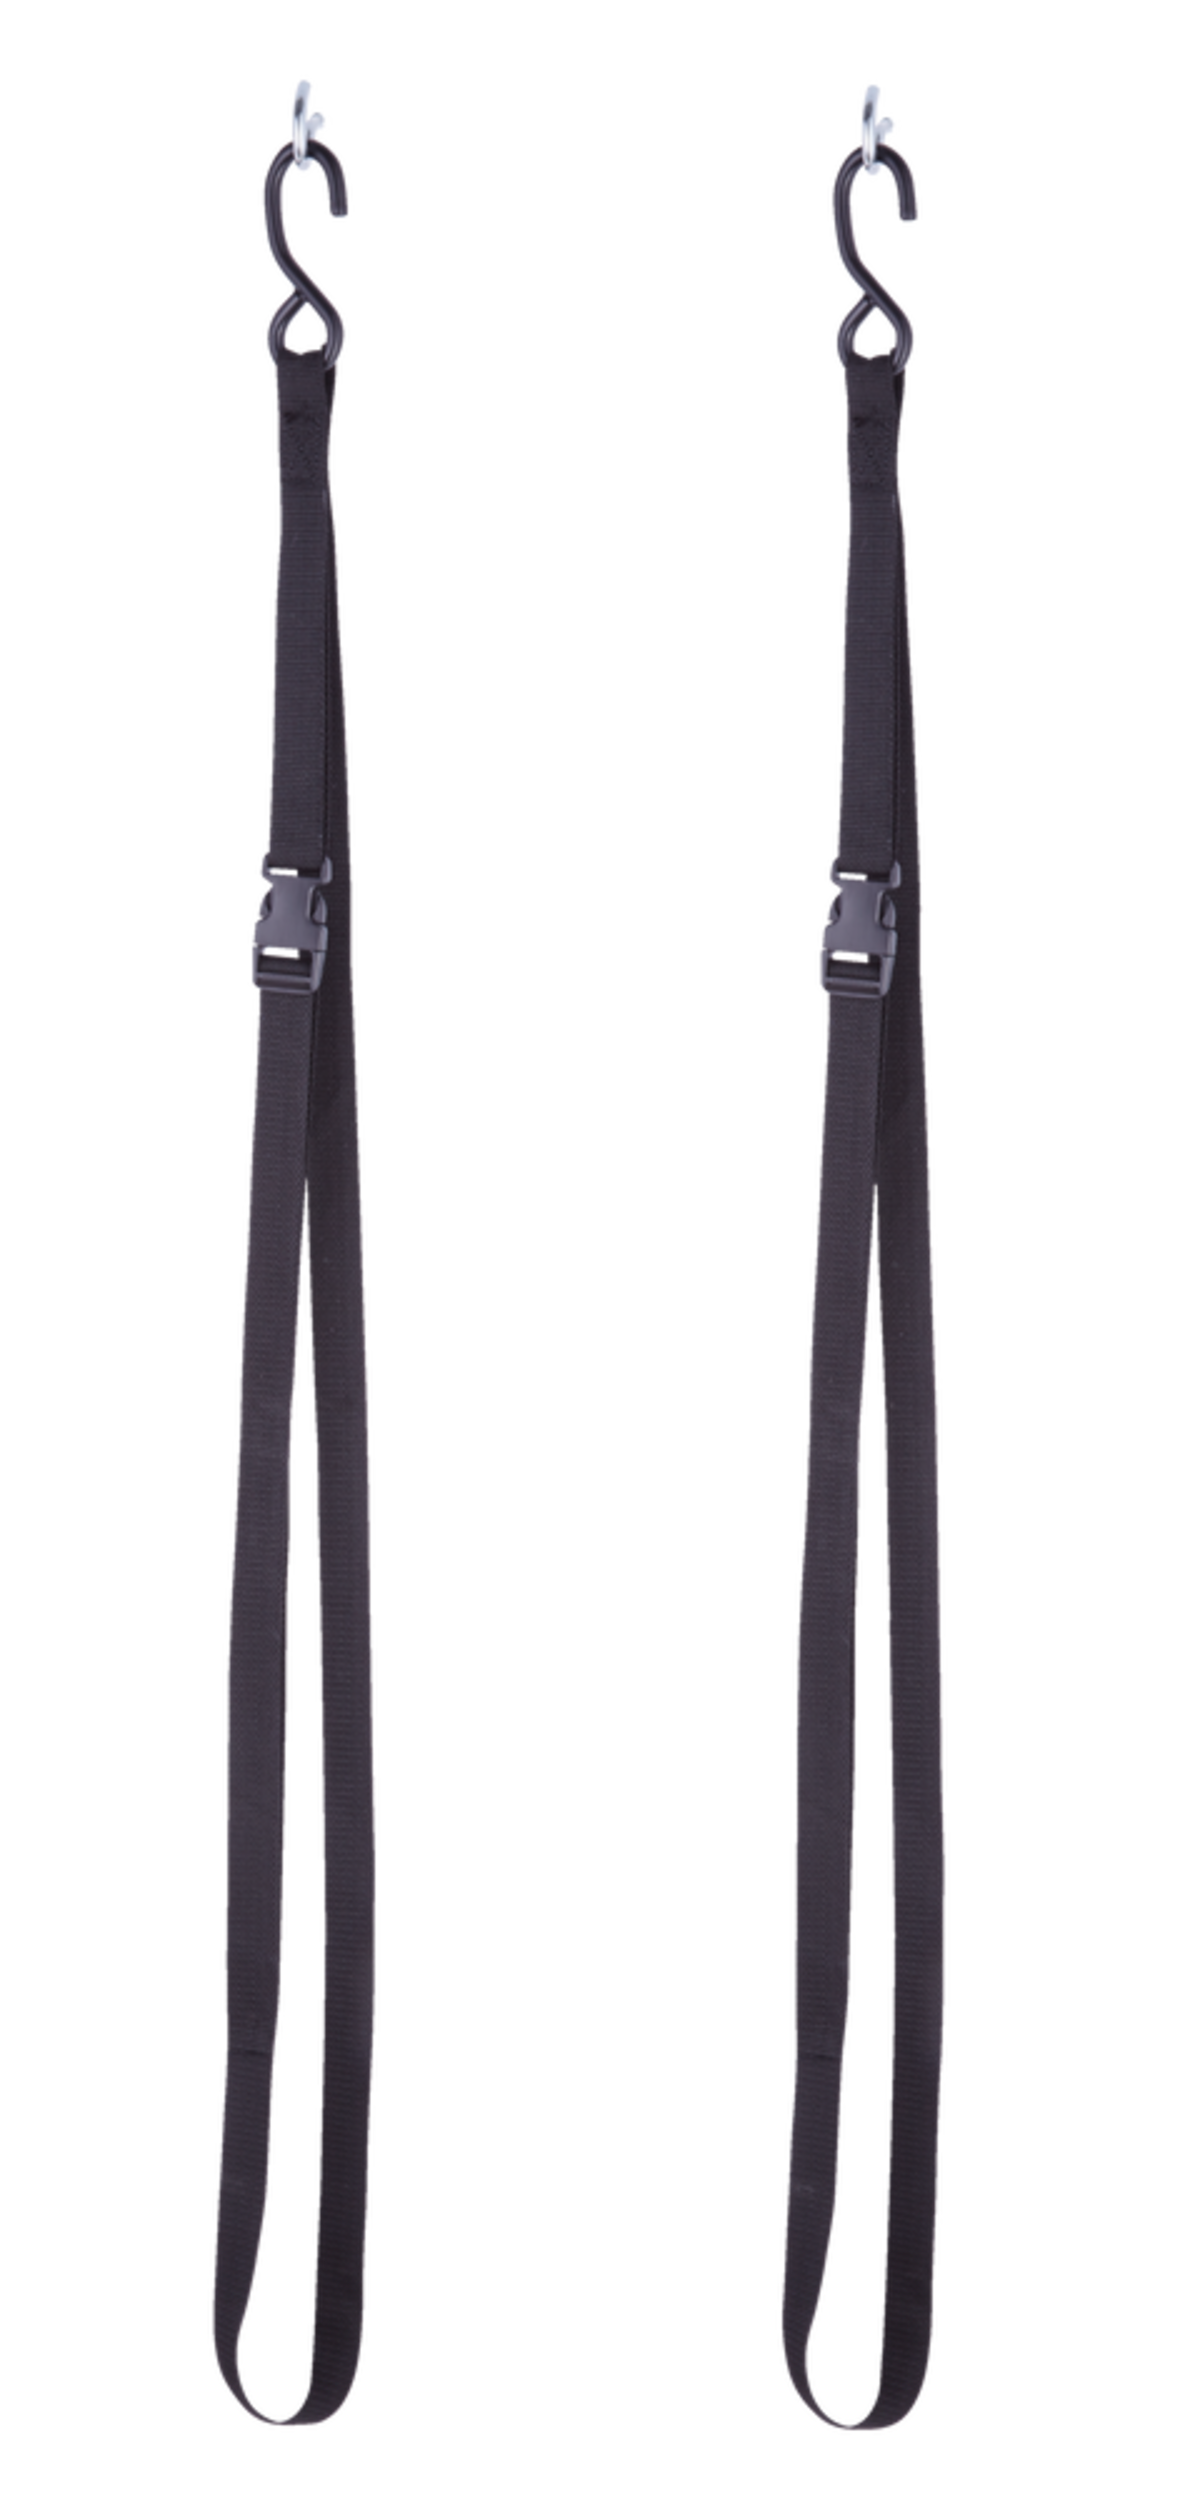 Mastercraft Ceiling / Wall Mount Kayak Strap System, Up to 27-kgs ...